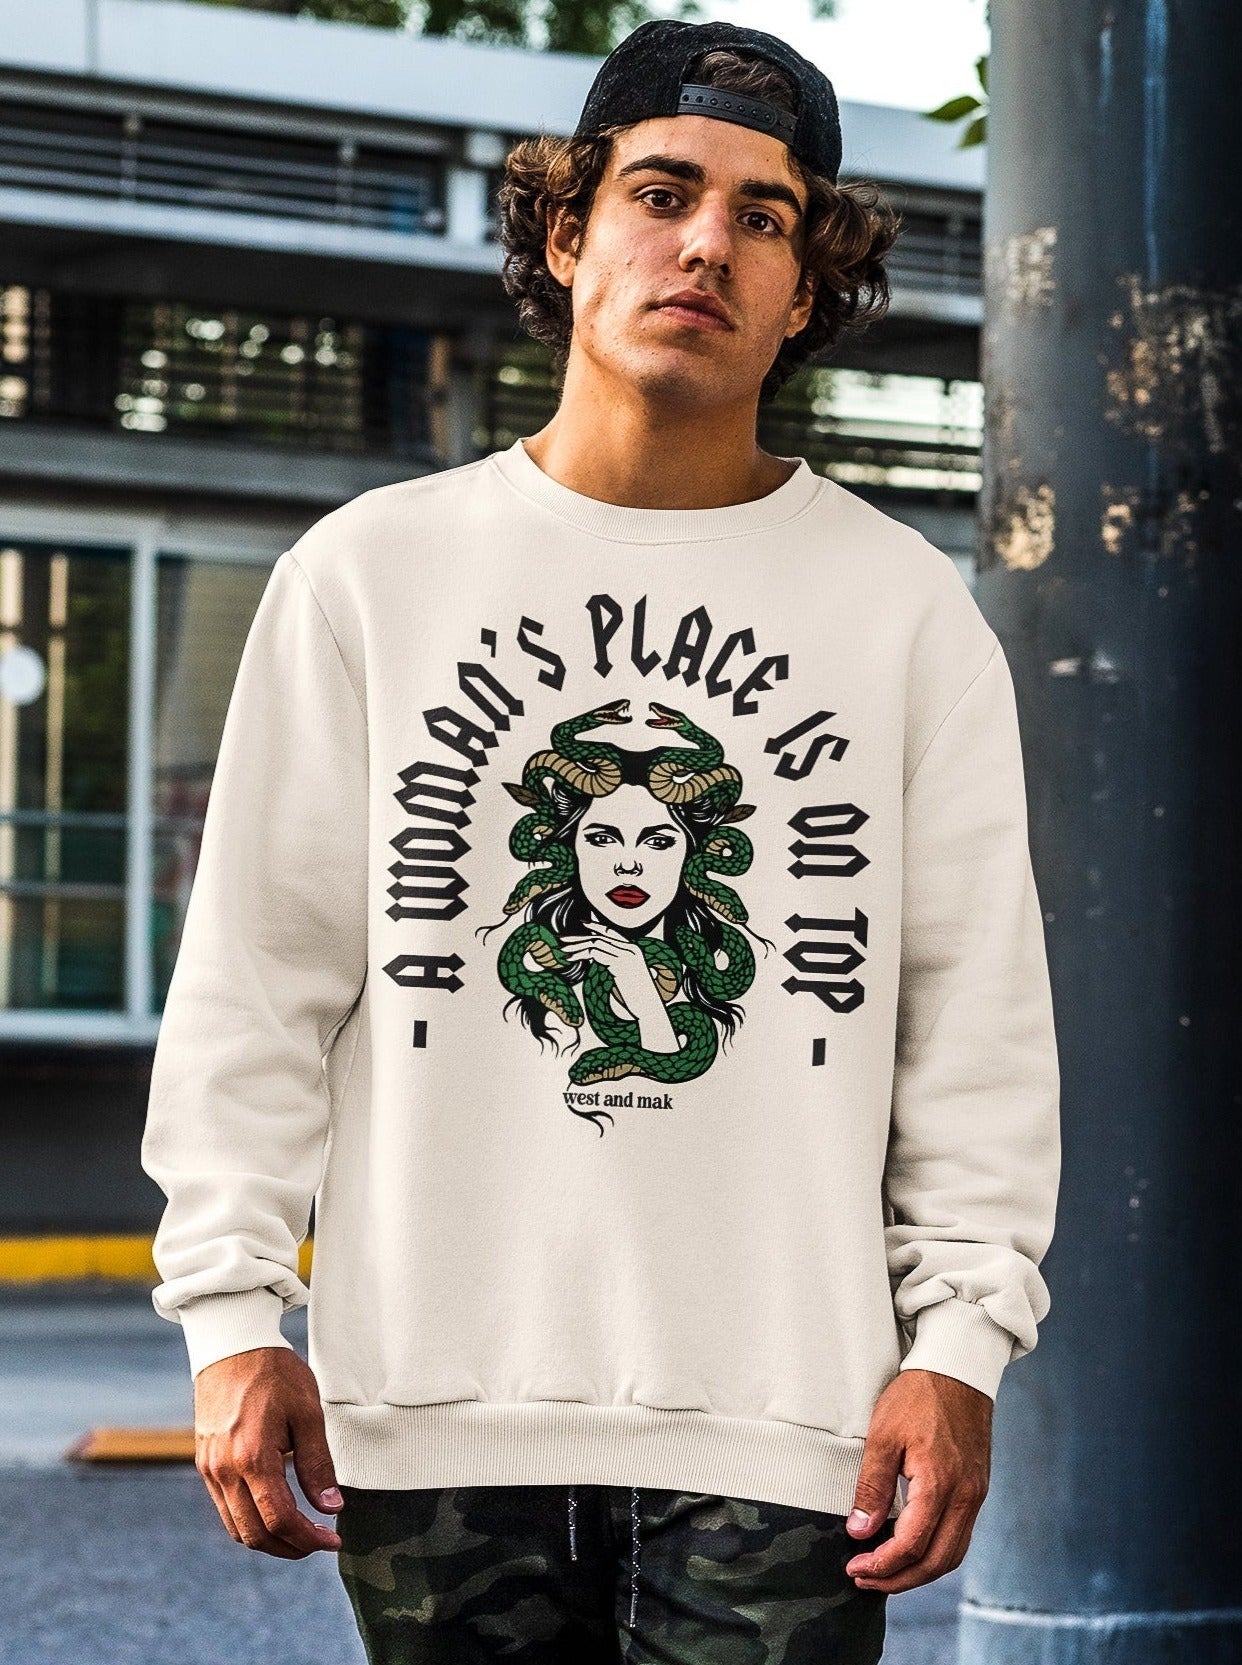 A Woman's Place is On Top - Adult Crew Pullover